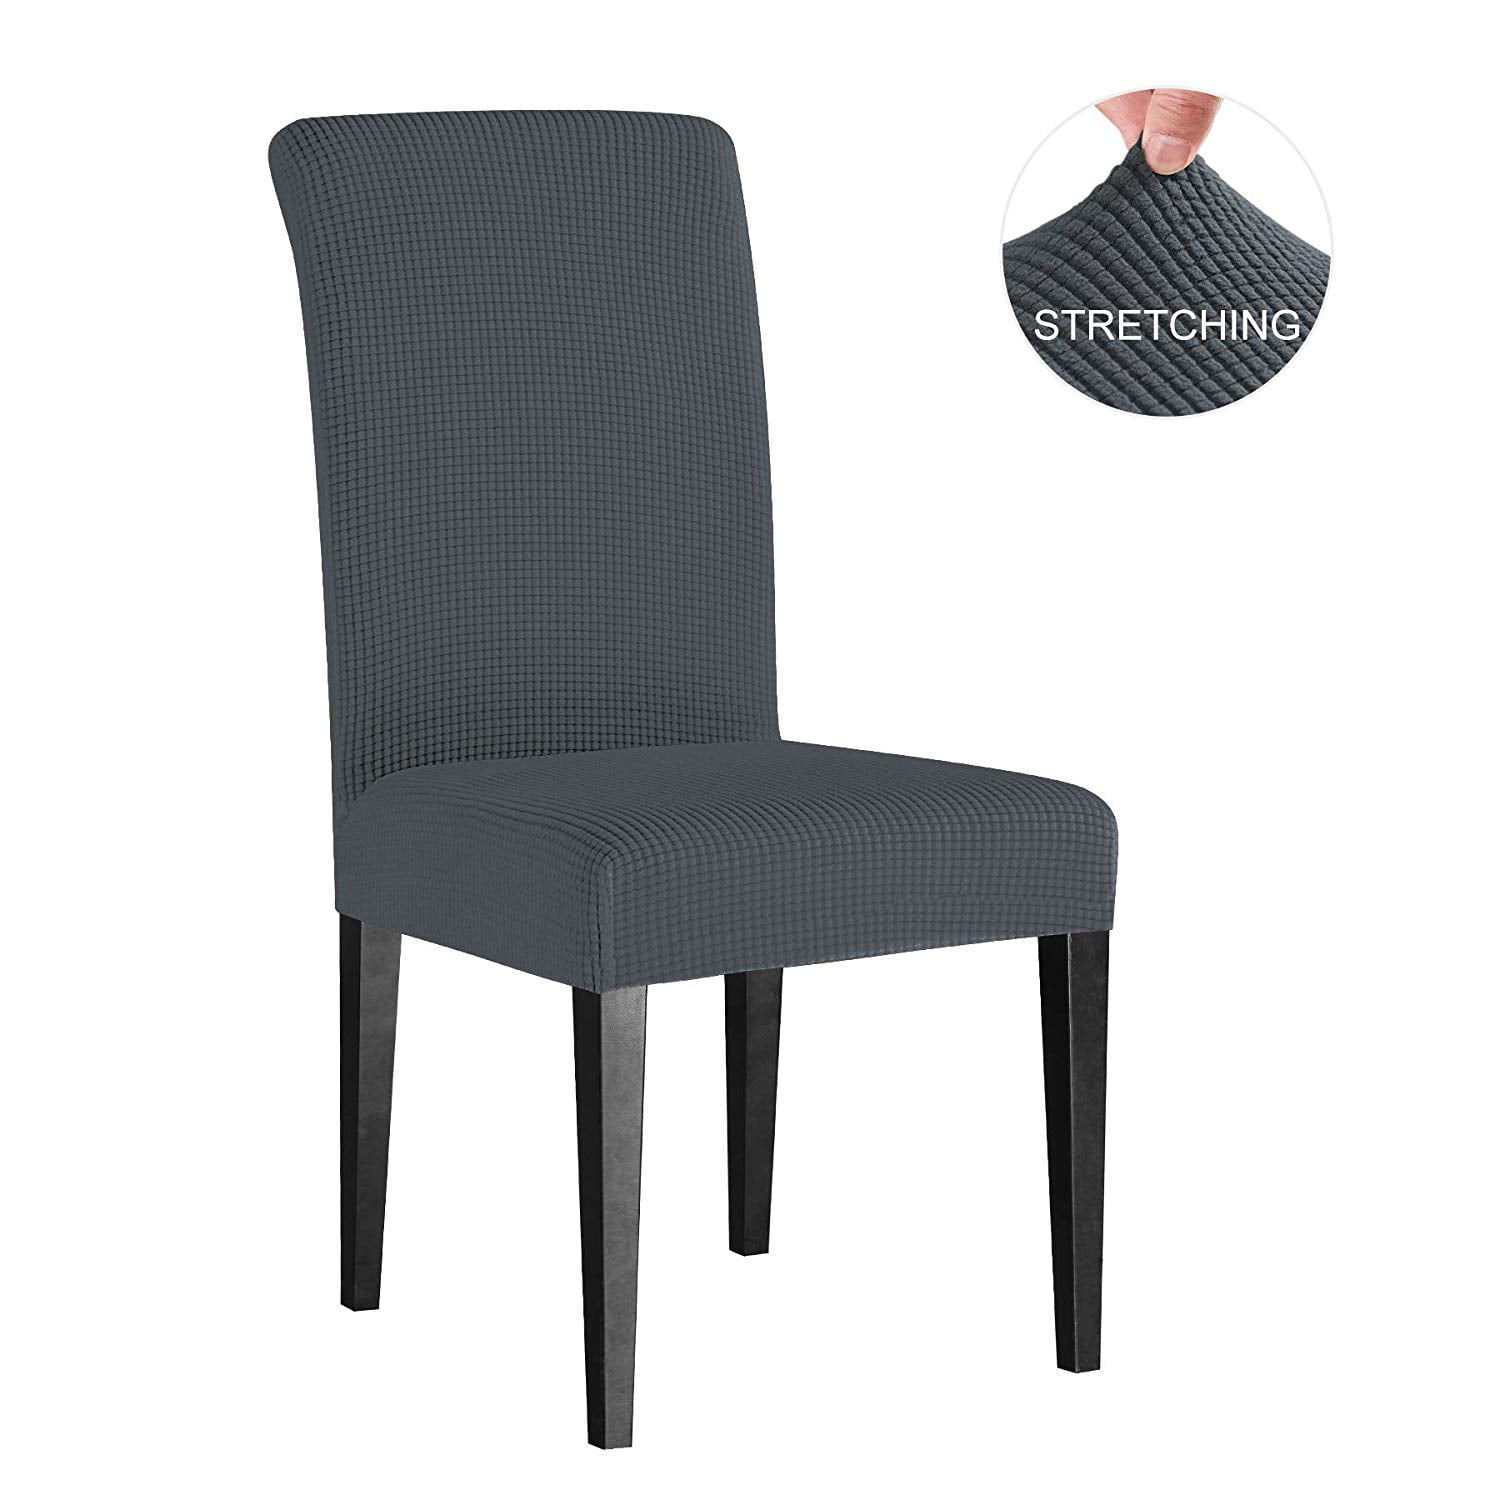  dining chair covers grey